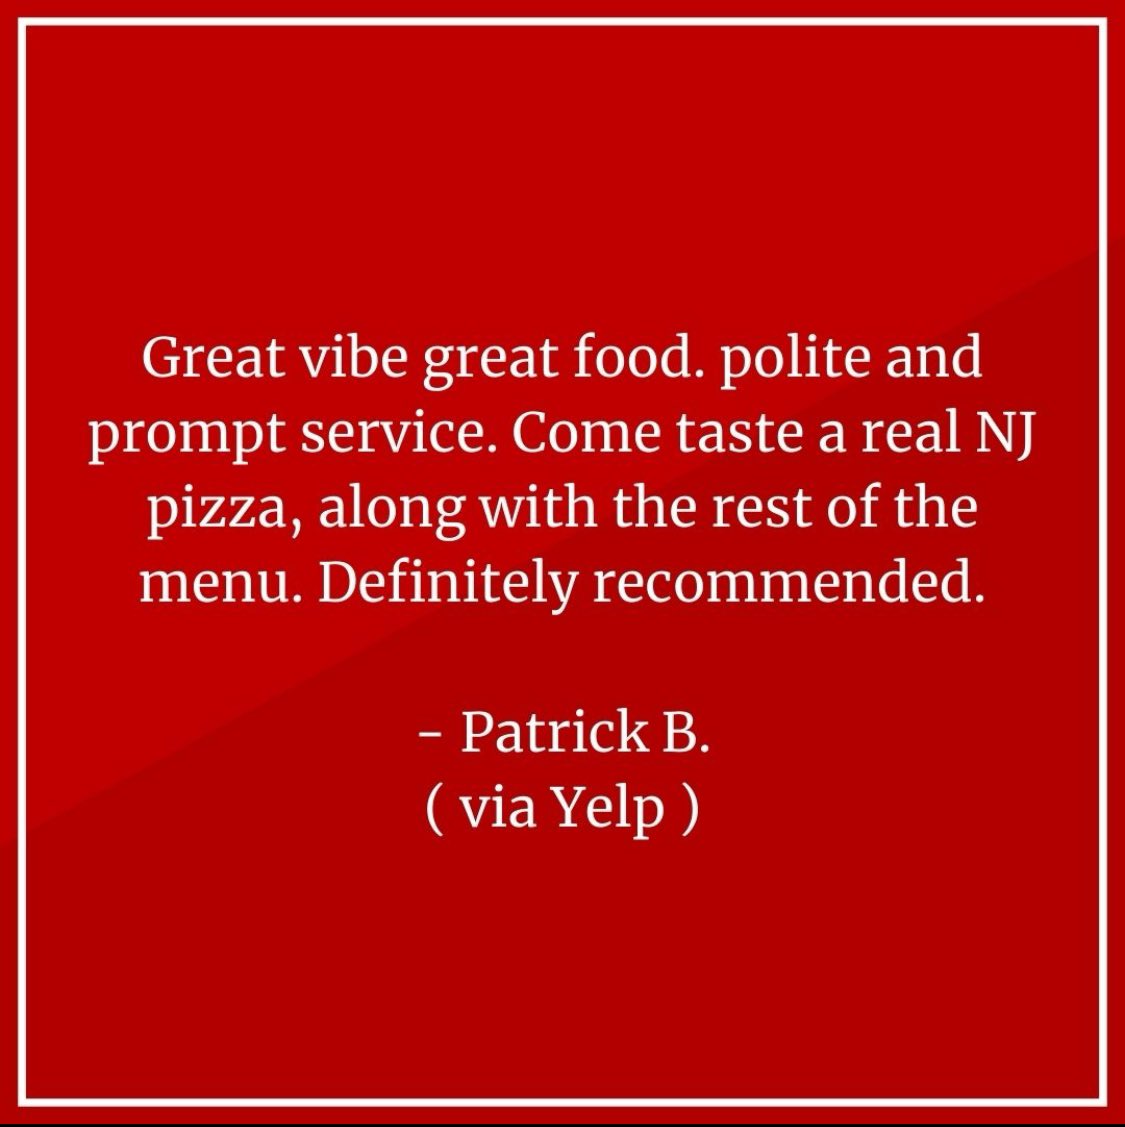 Thanks a bunch for this awesome review, Patrick! We're thrilled you enjoyed our atmosphere, food, and service. We can't wait to serve you up some more authentic NJ #pizza goodness! #KinchleysTavern #Yelp #RamseyNJ #ThinCrustPizza